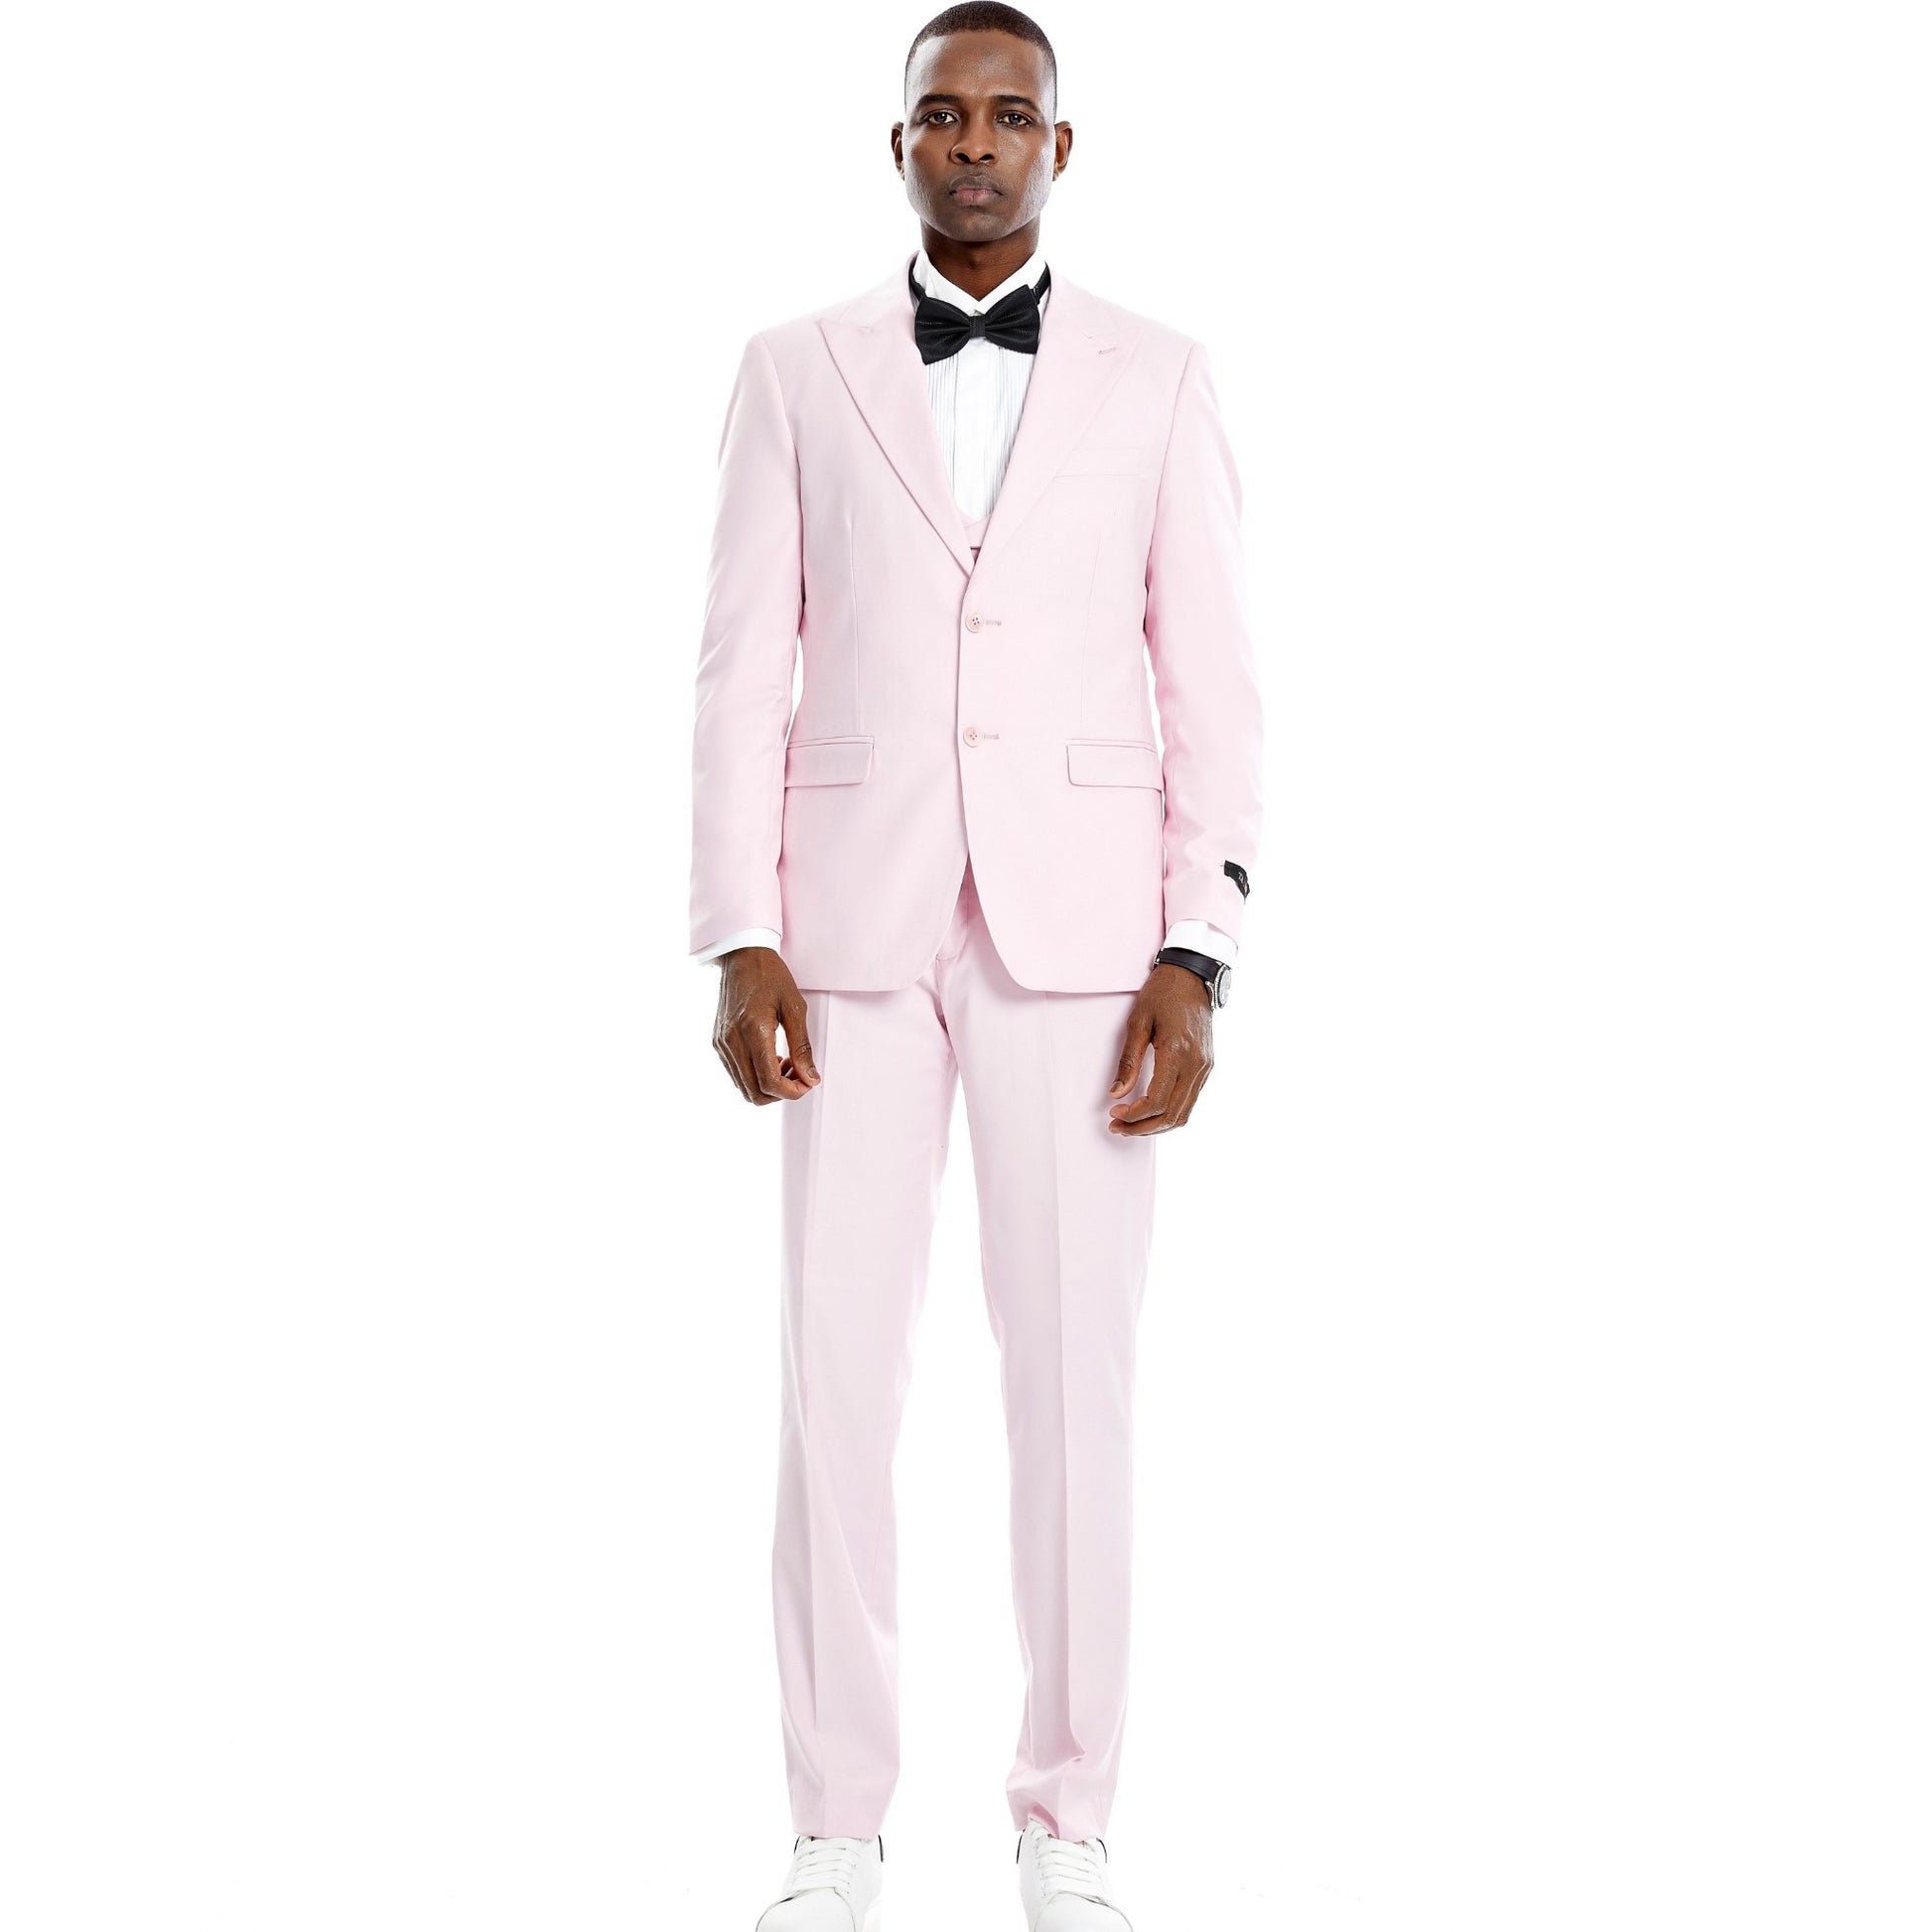 Charming man dressed in a blush pink full suit for prom night.